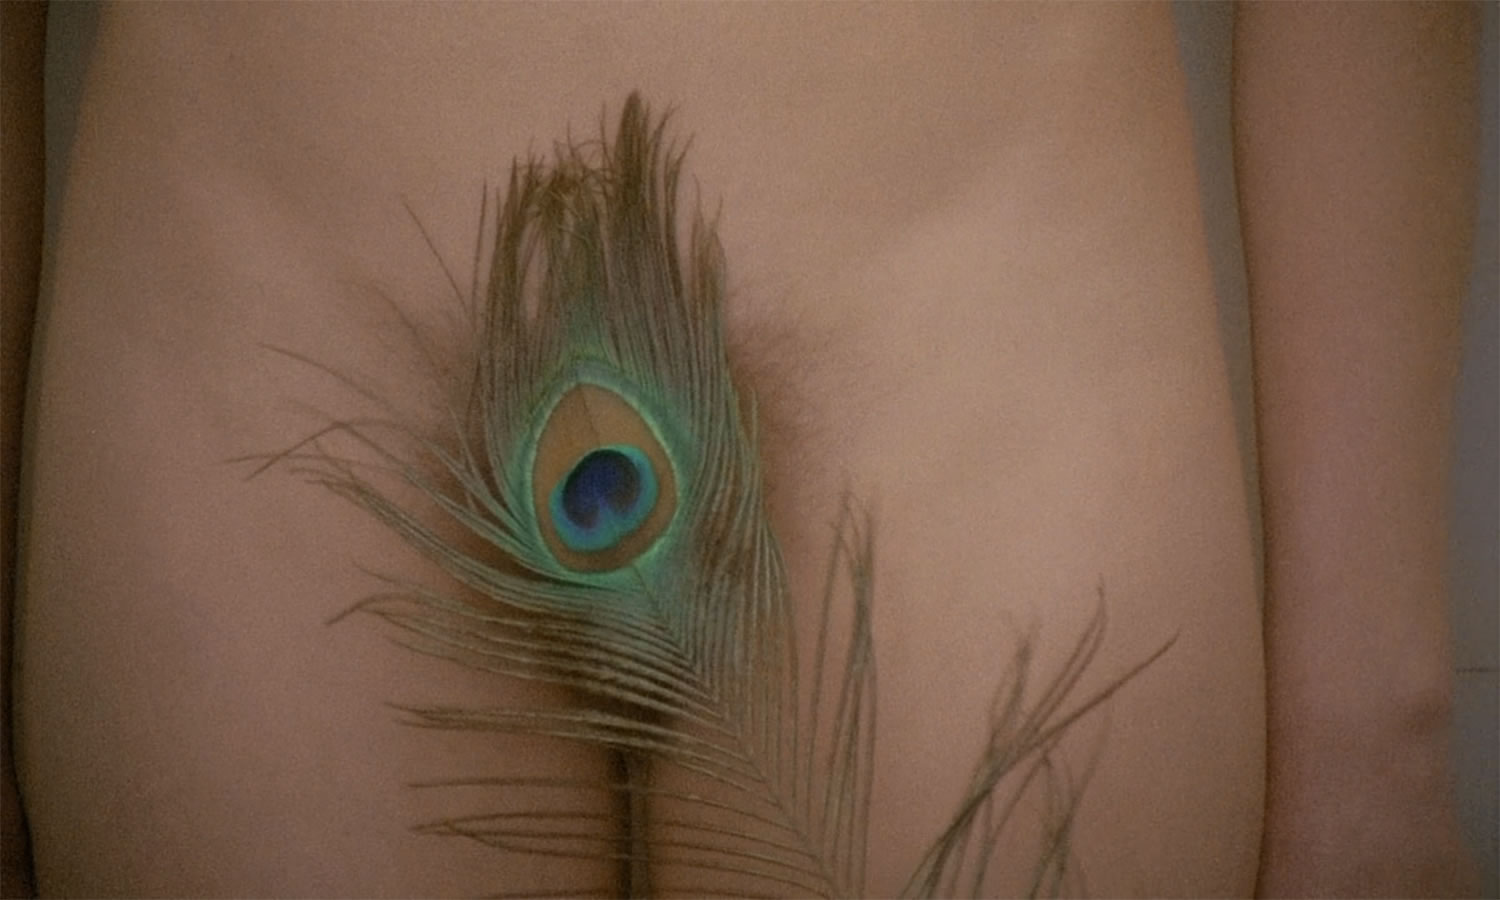 peacock feather over intimate body part, immortal tales